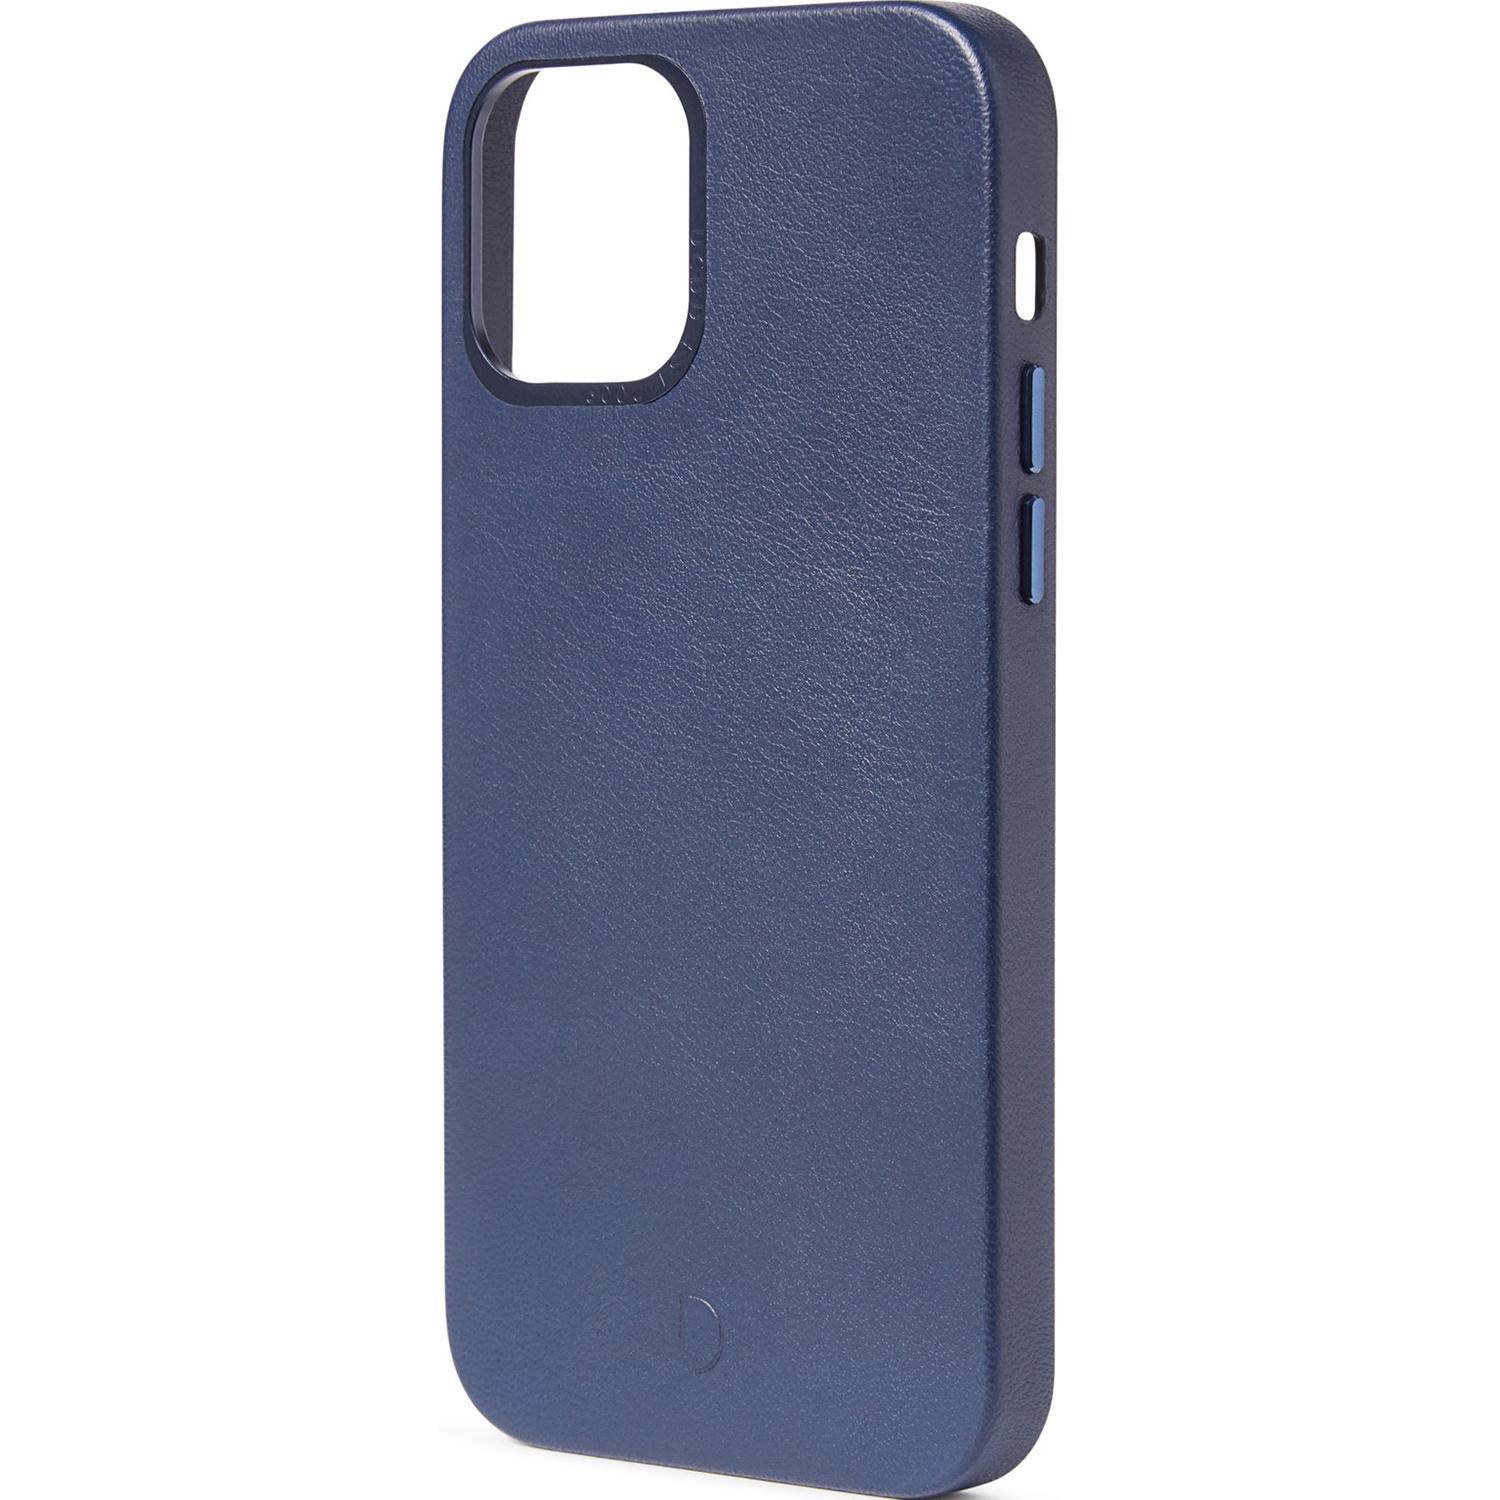 Leather Backcover MagSafe iPhone 12 Mini - Blauw - Blauw / Blue - Decoded